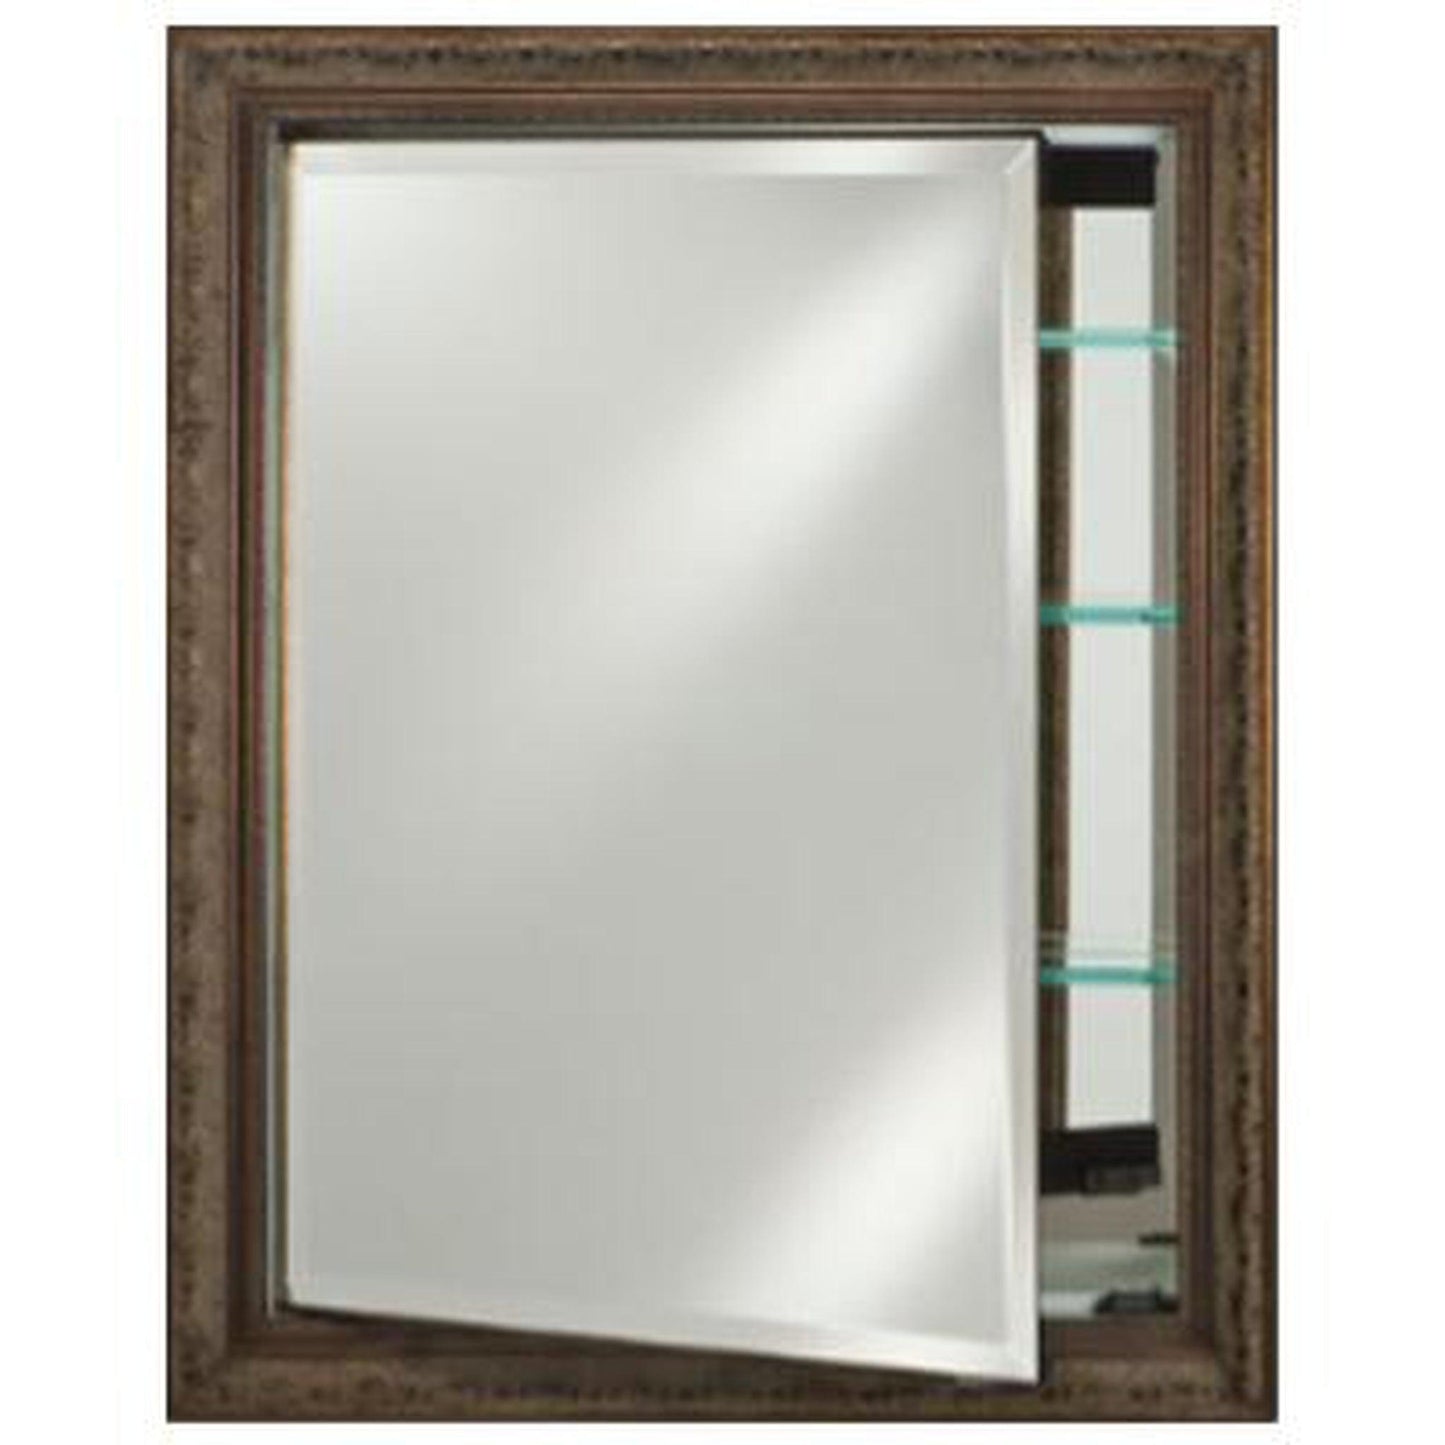 Afina Signature 17" x 36" Polished Glimmer-Flat Recessed Reversible Hinged Single Door Medicine Cabinet With Beveled Edge Mirror